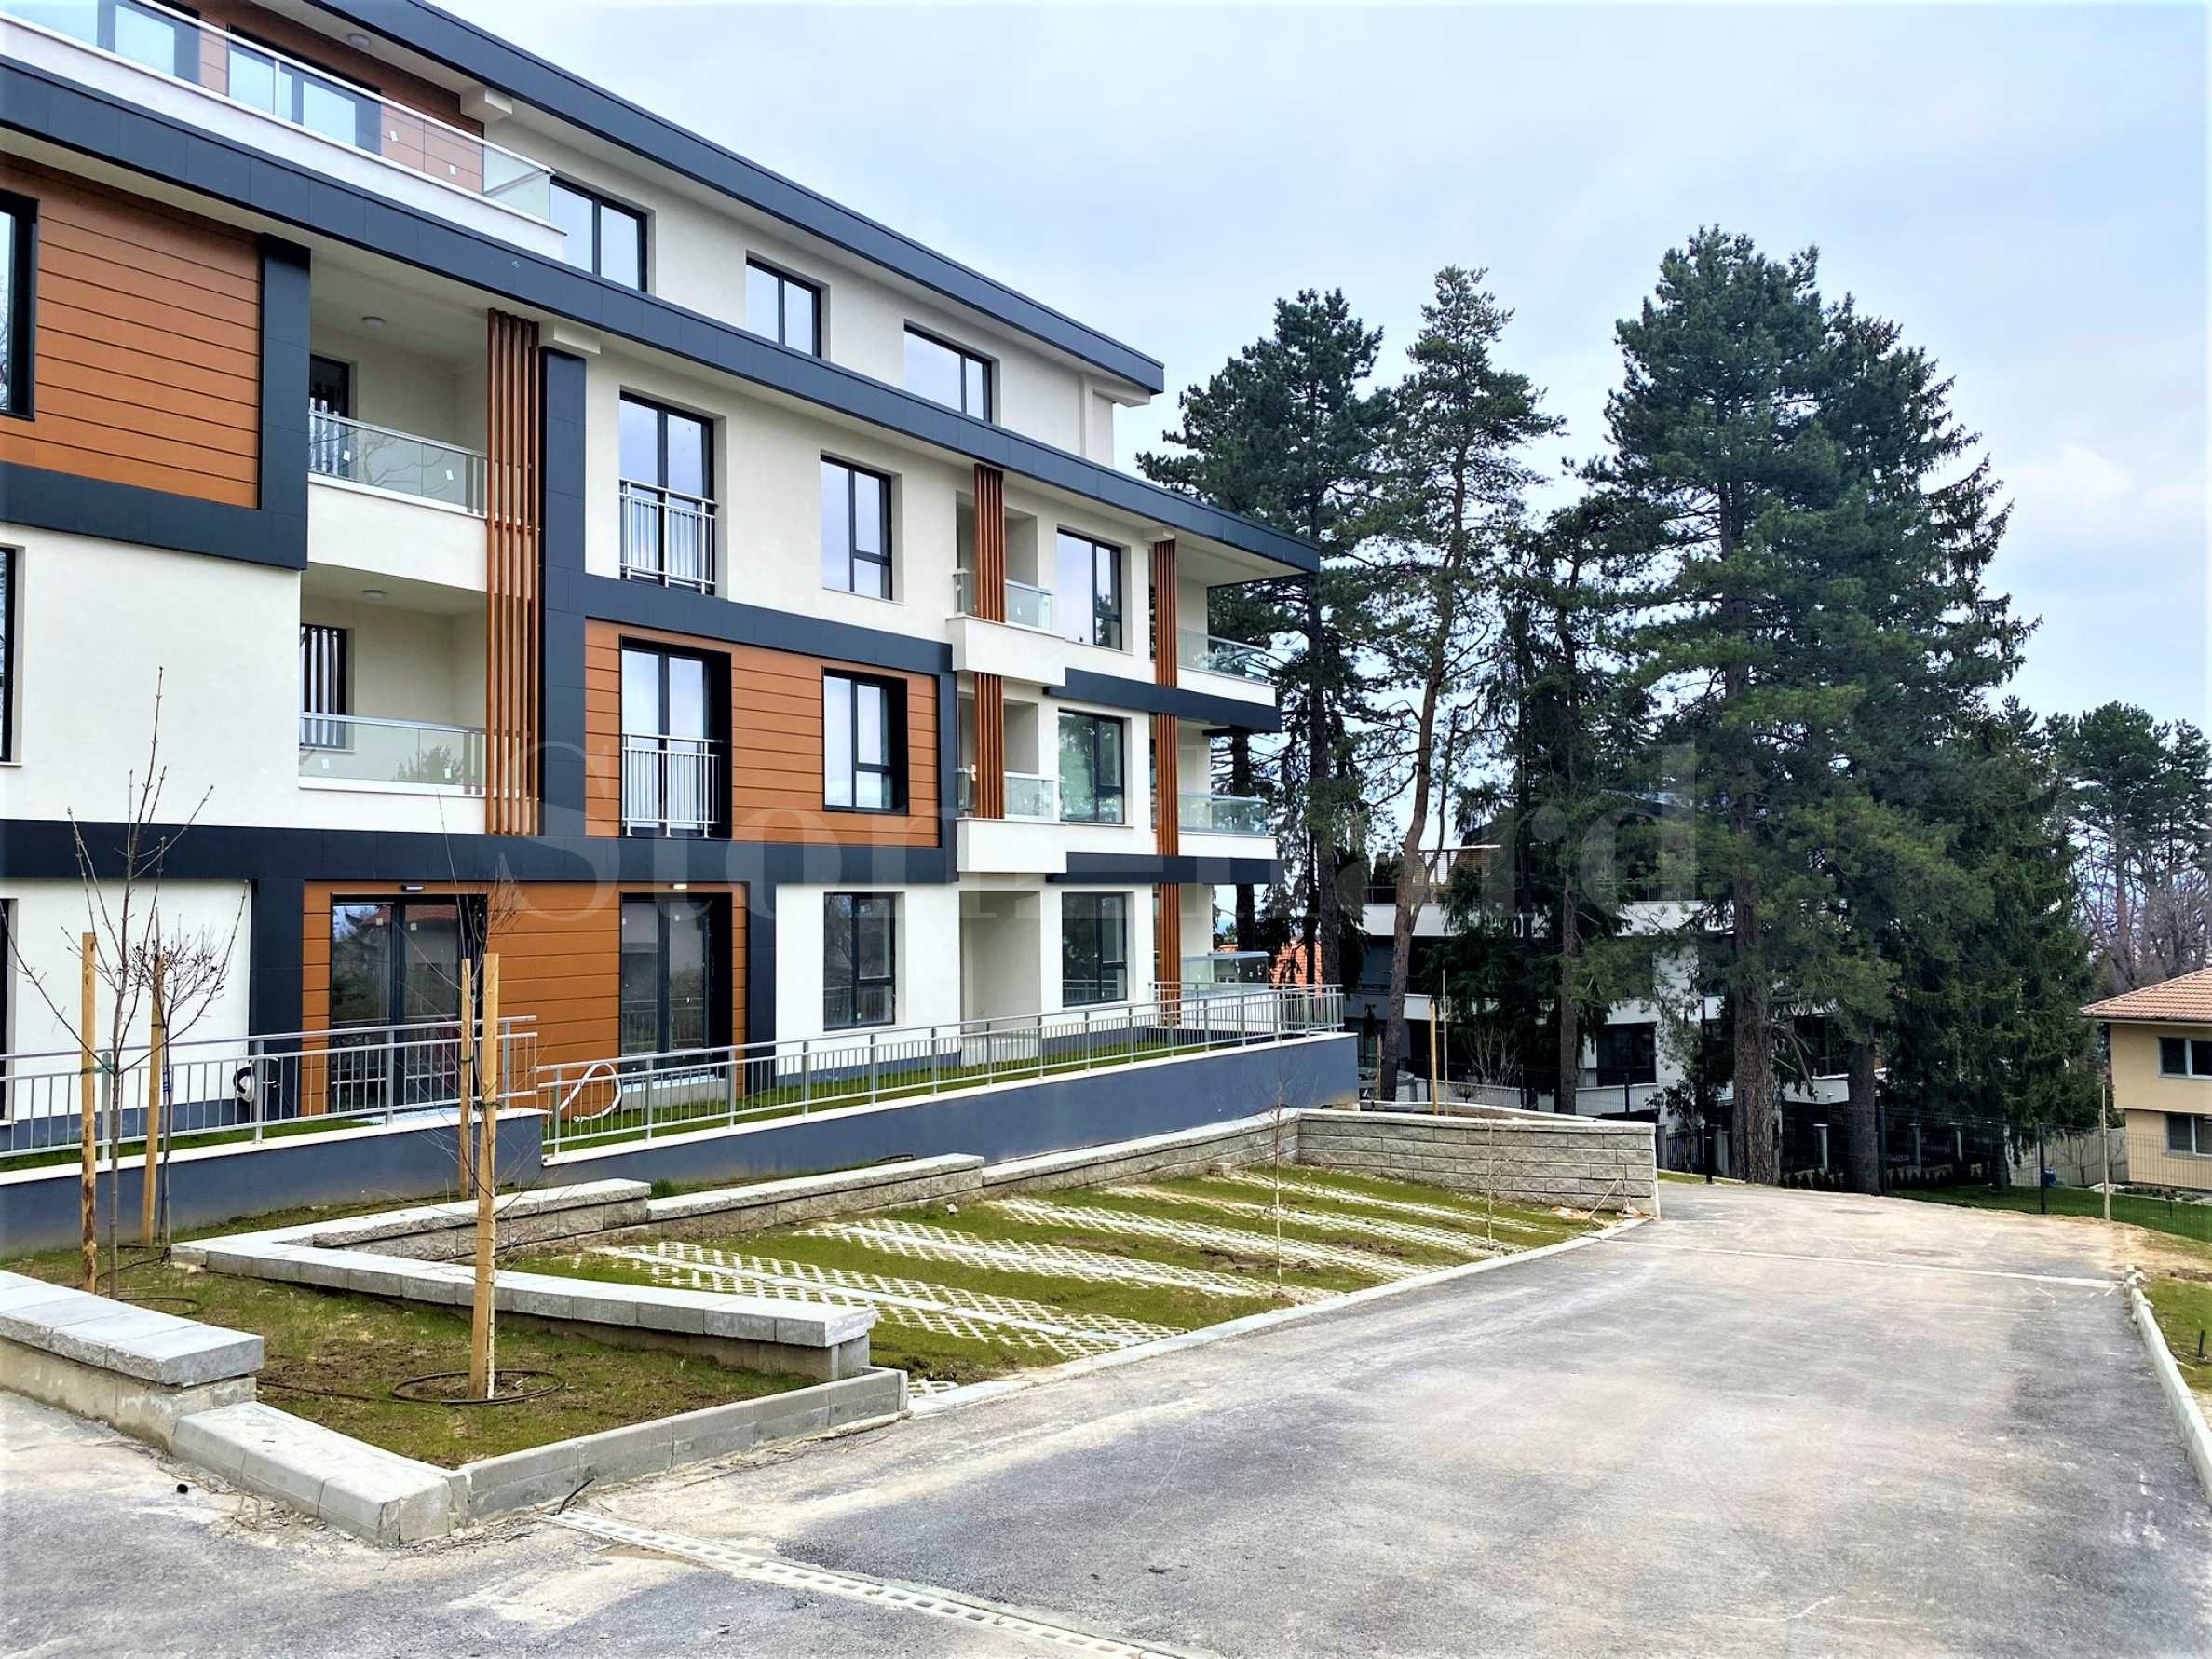 Apartments in a complex in front of Act 16 with richly landscaped surroundings and views of Vitosha1 - Stonehard